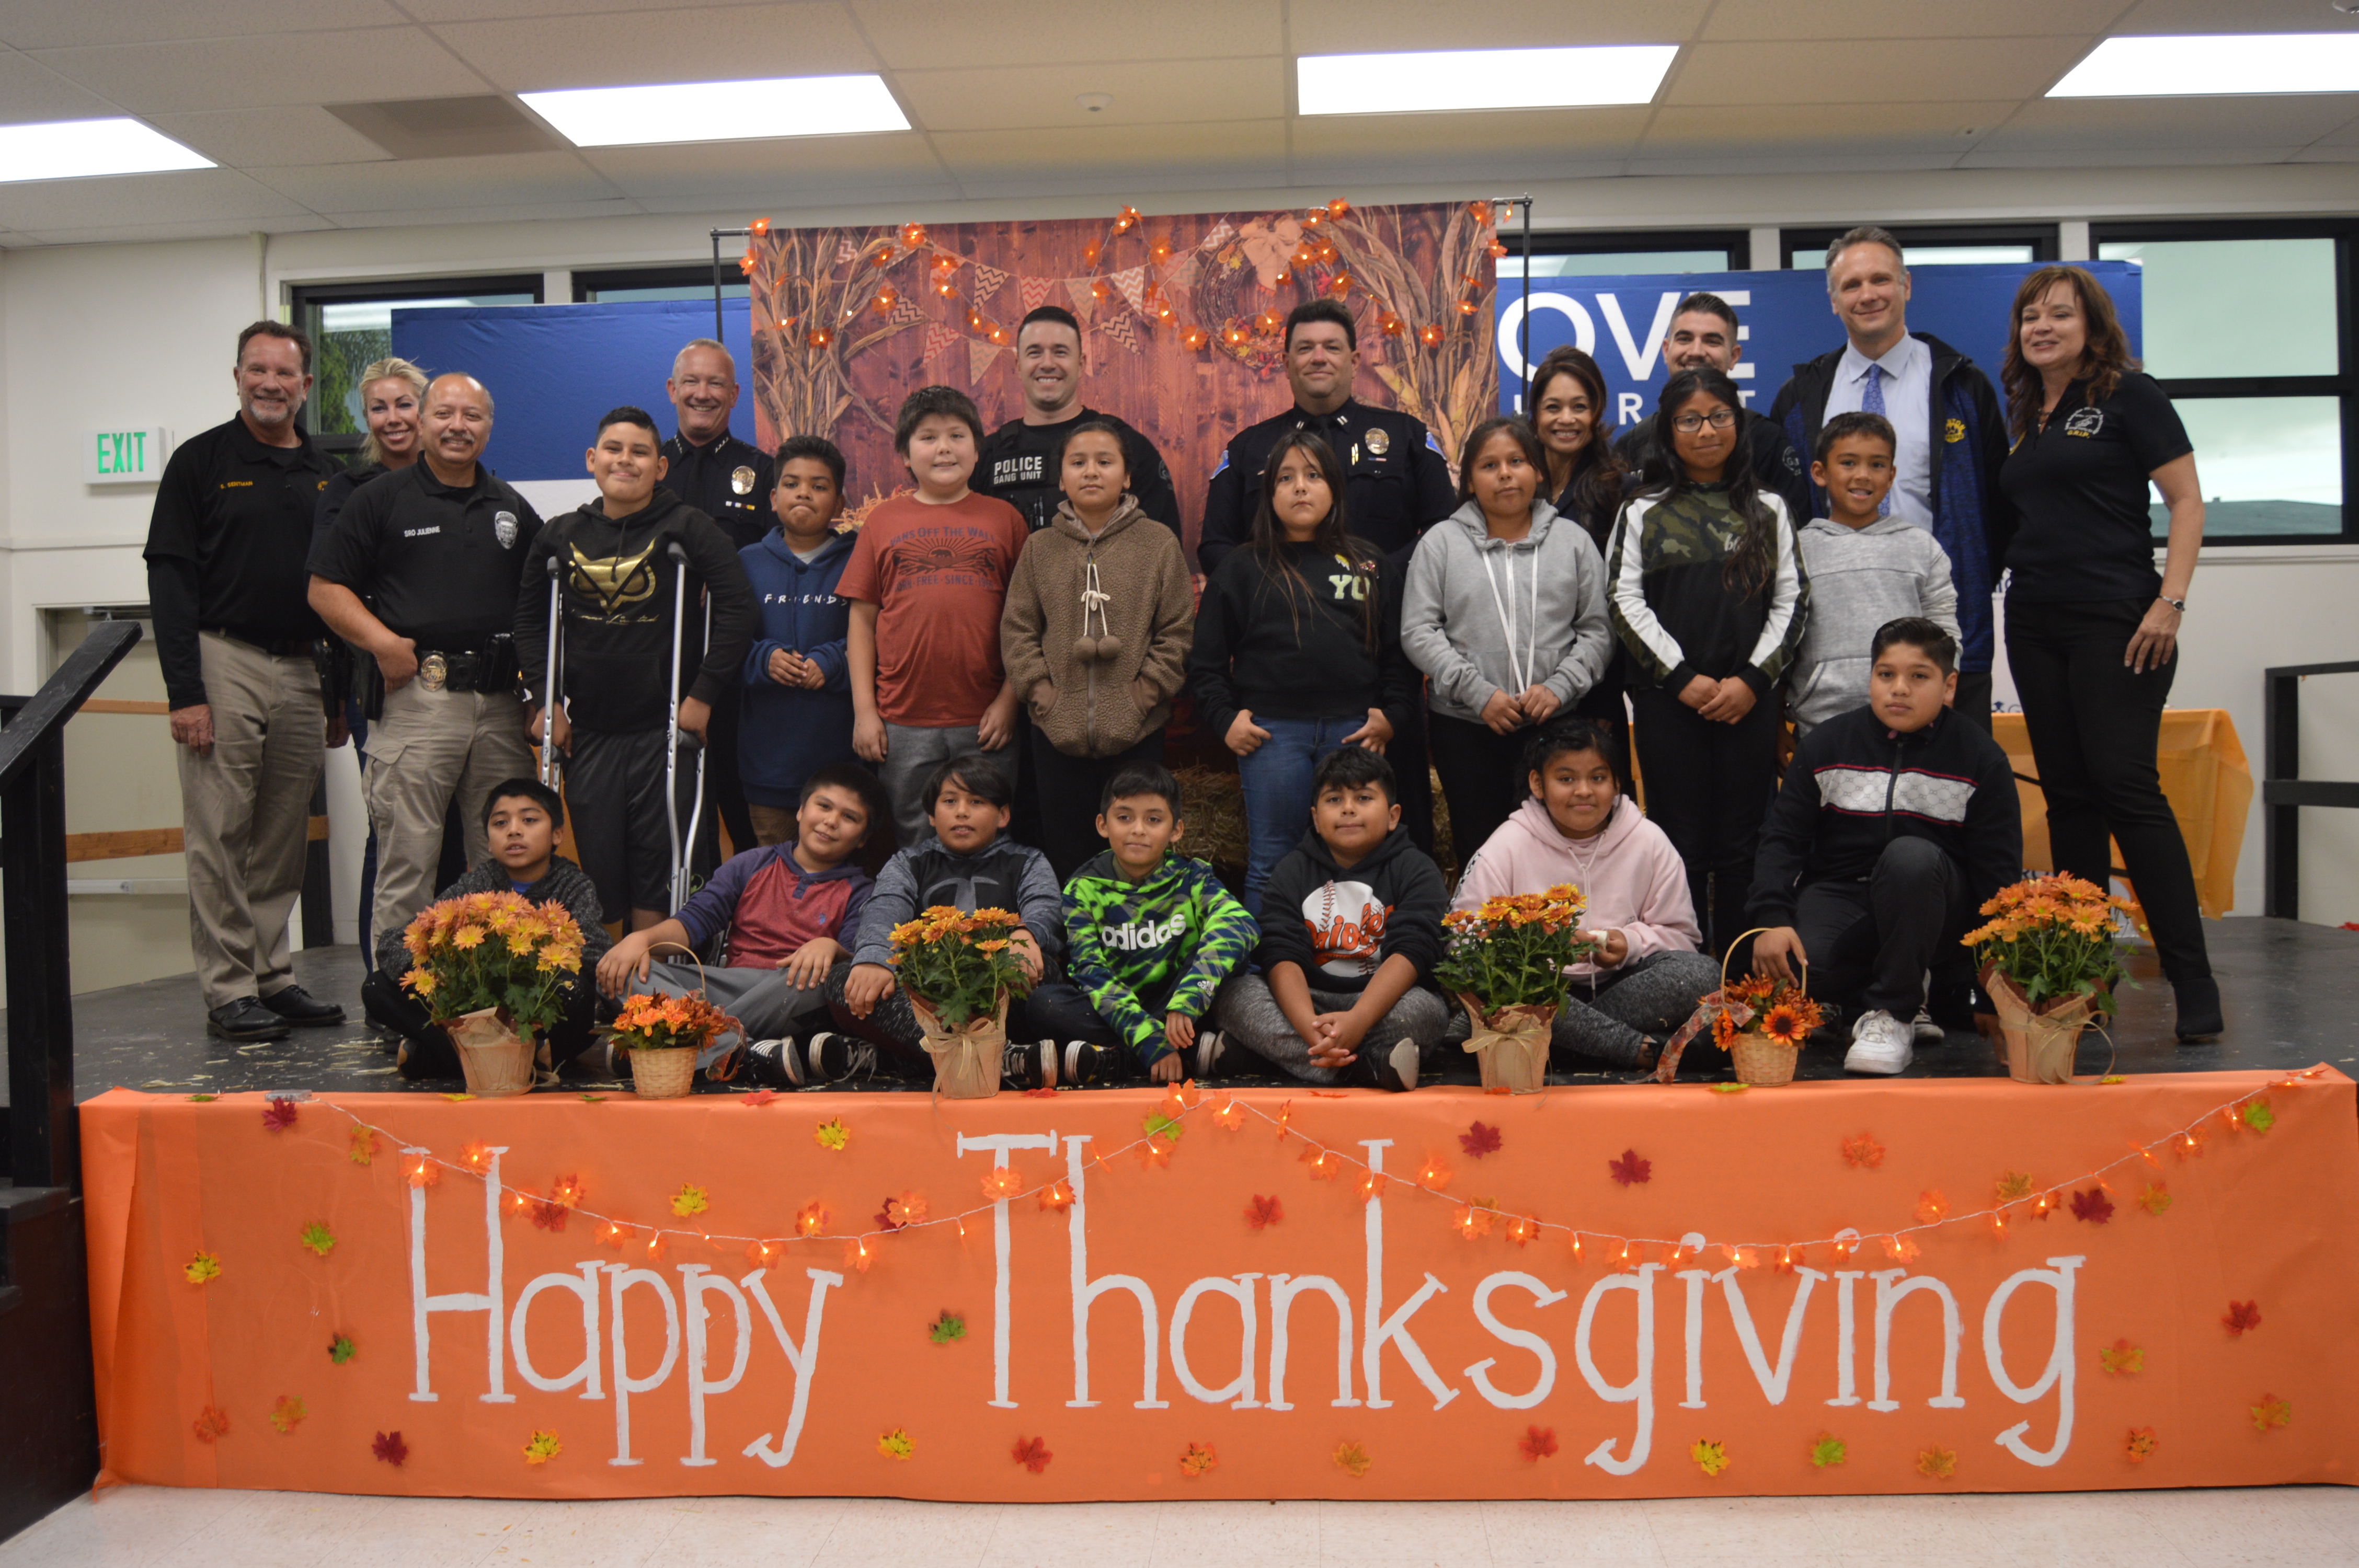 Students in front of a "Happy Thanksgiving" sign